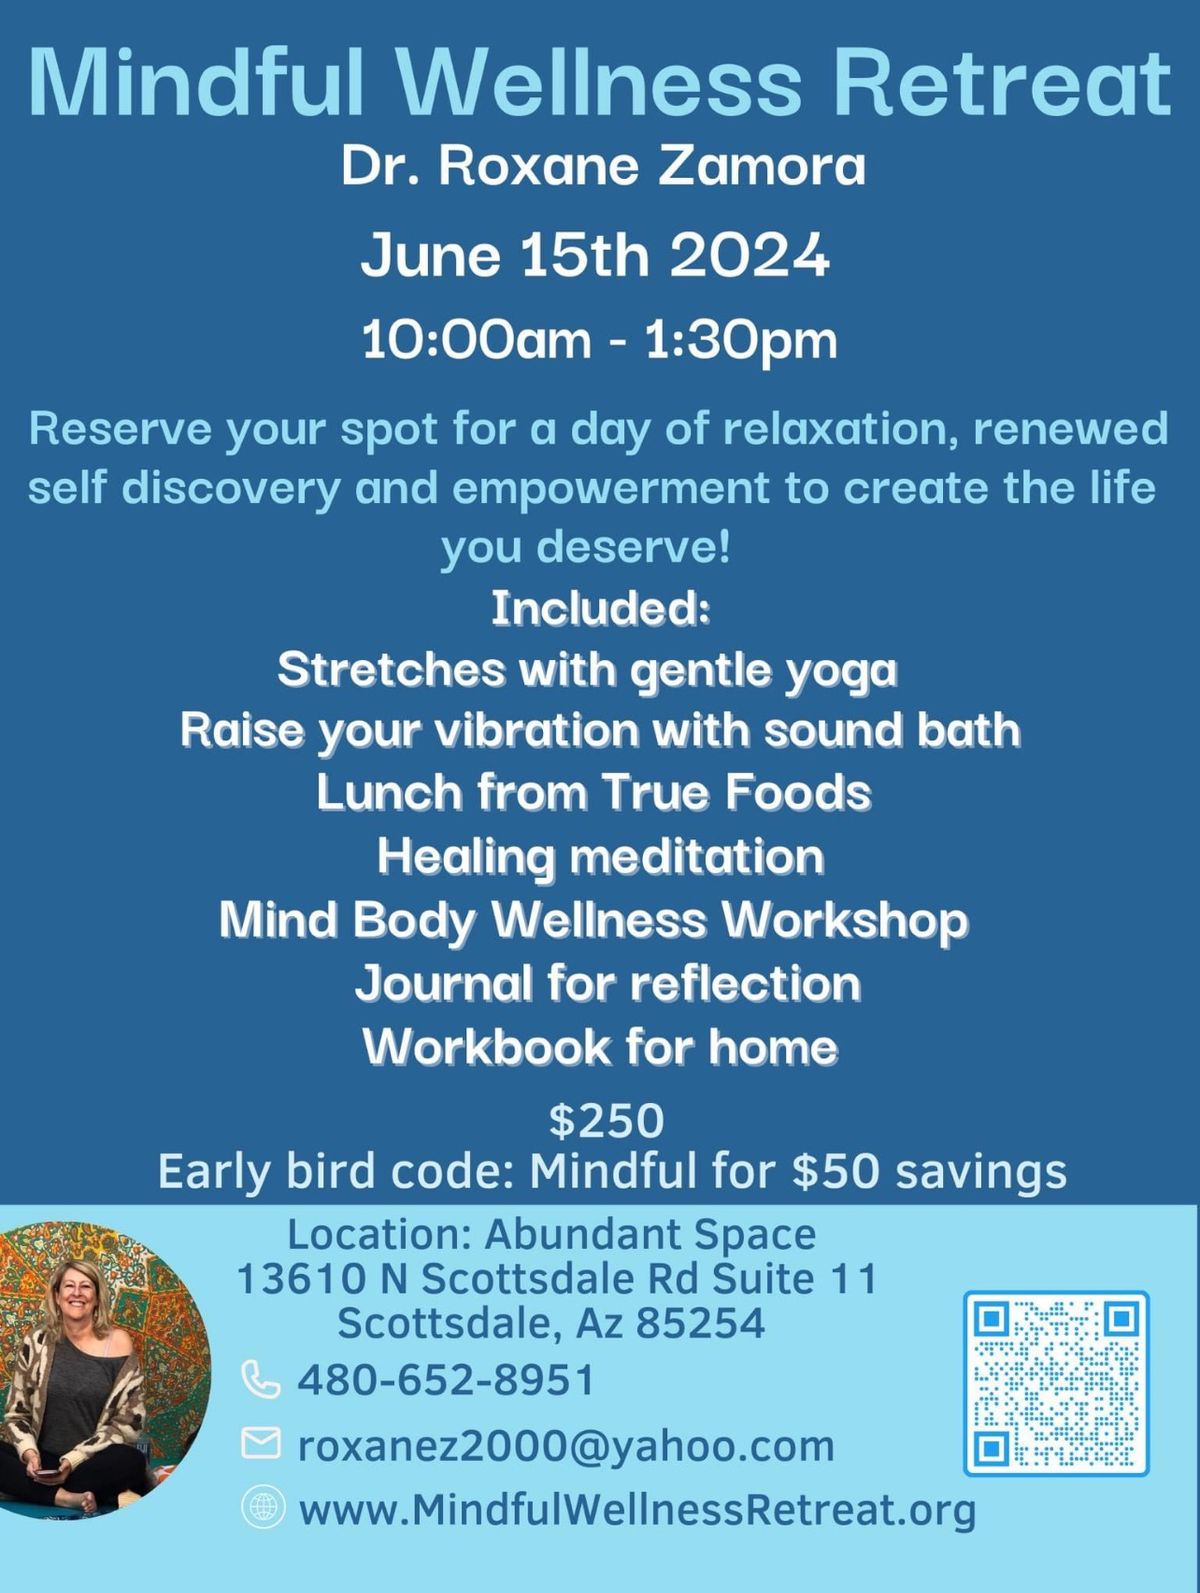 Reminder to reserve a spot for you and your guest ? let\u2019s grow, heal and be well in mind and body